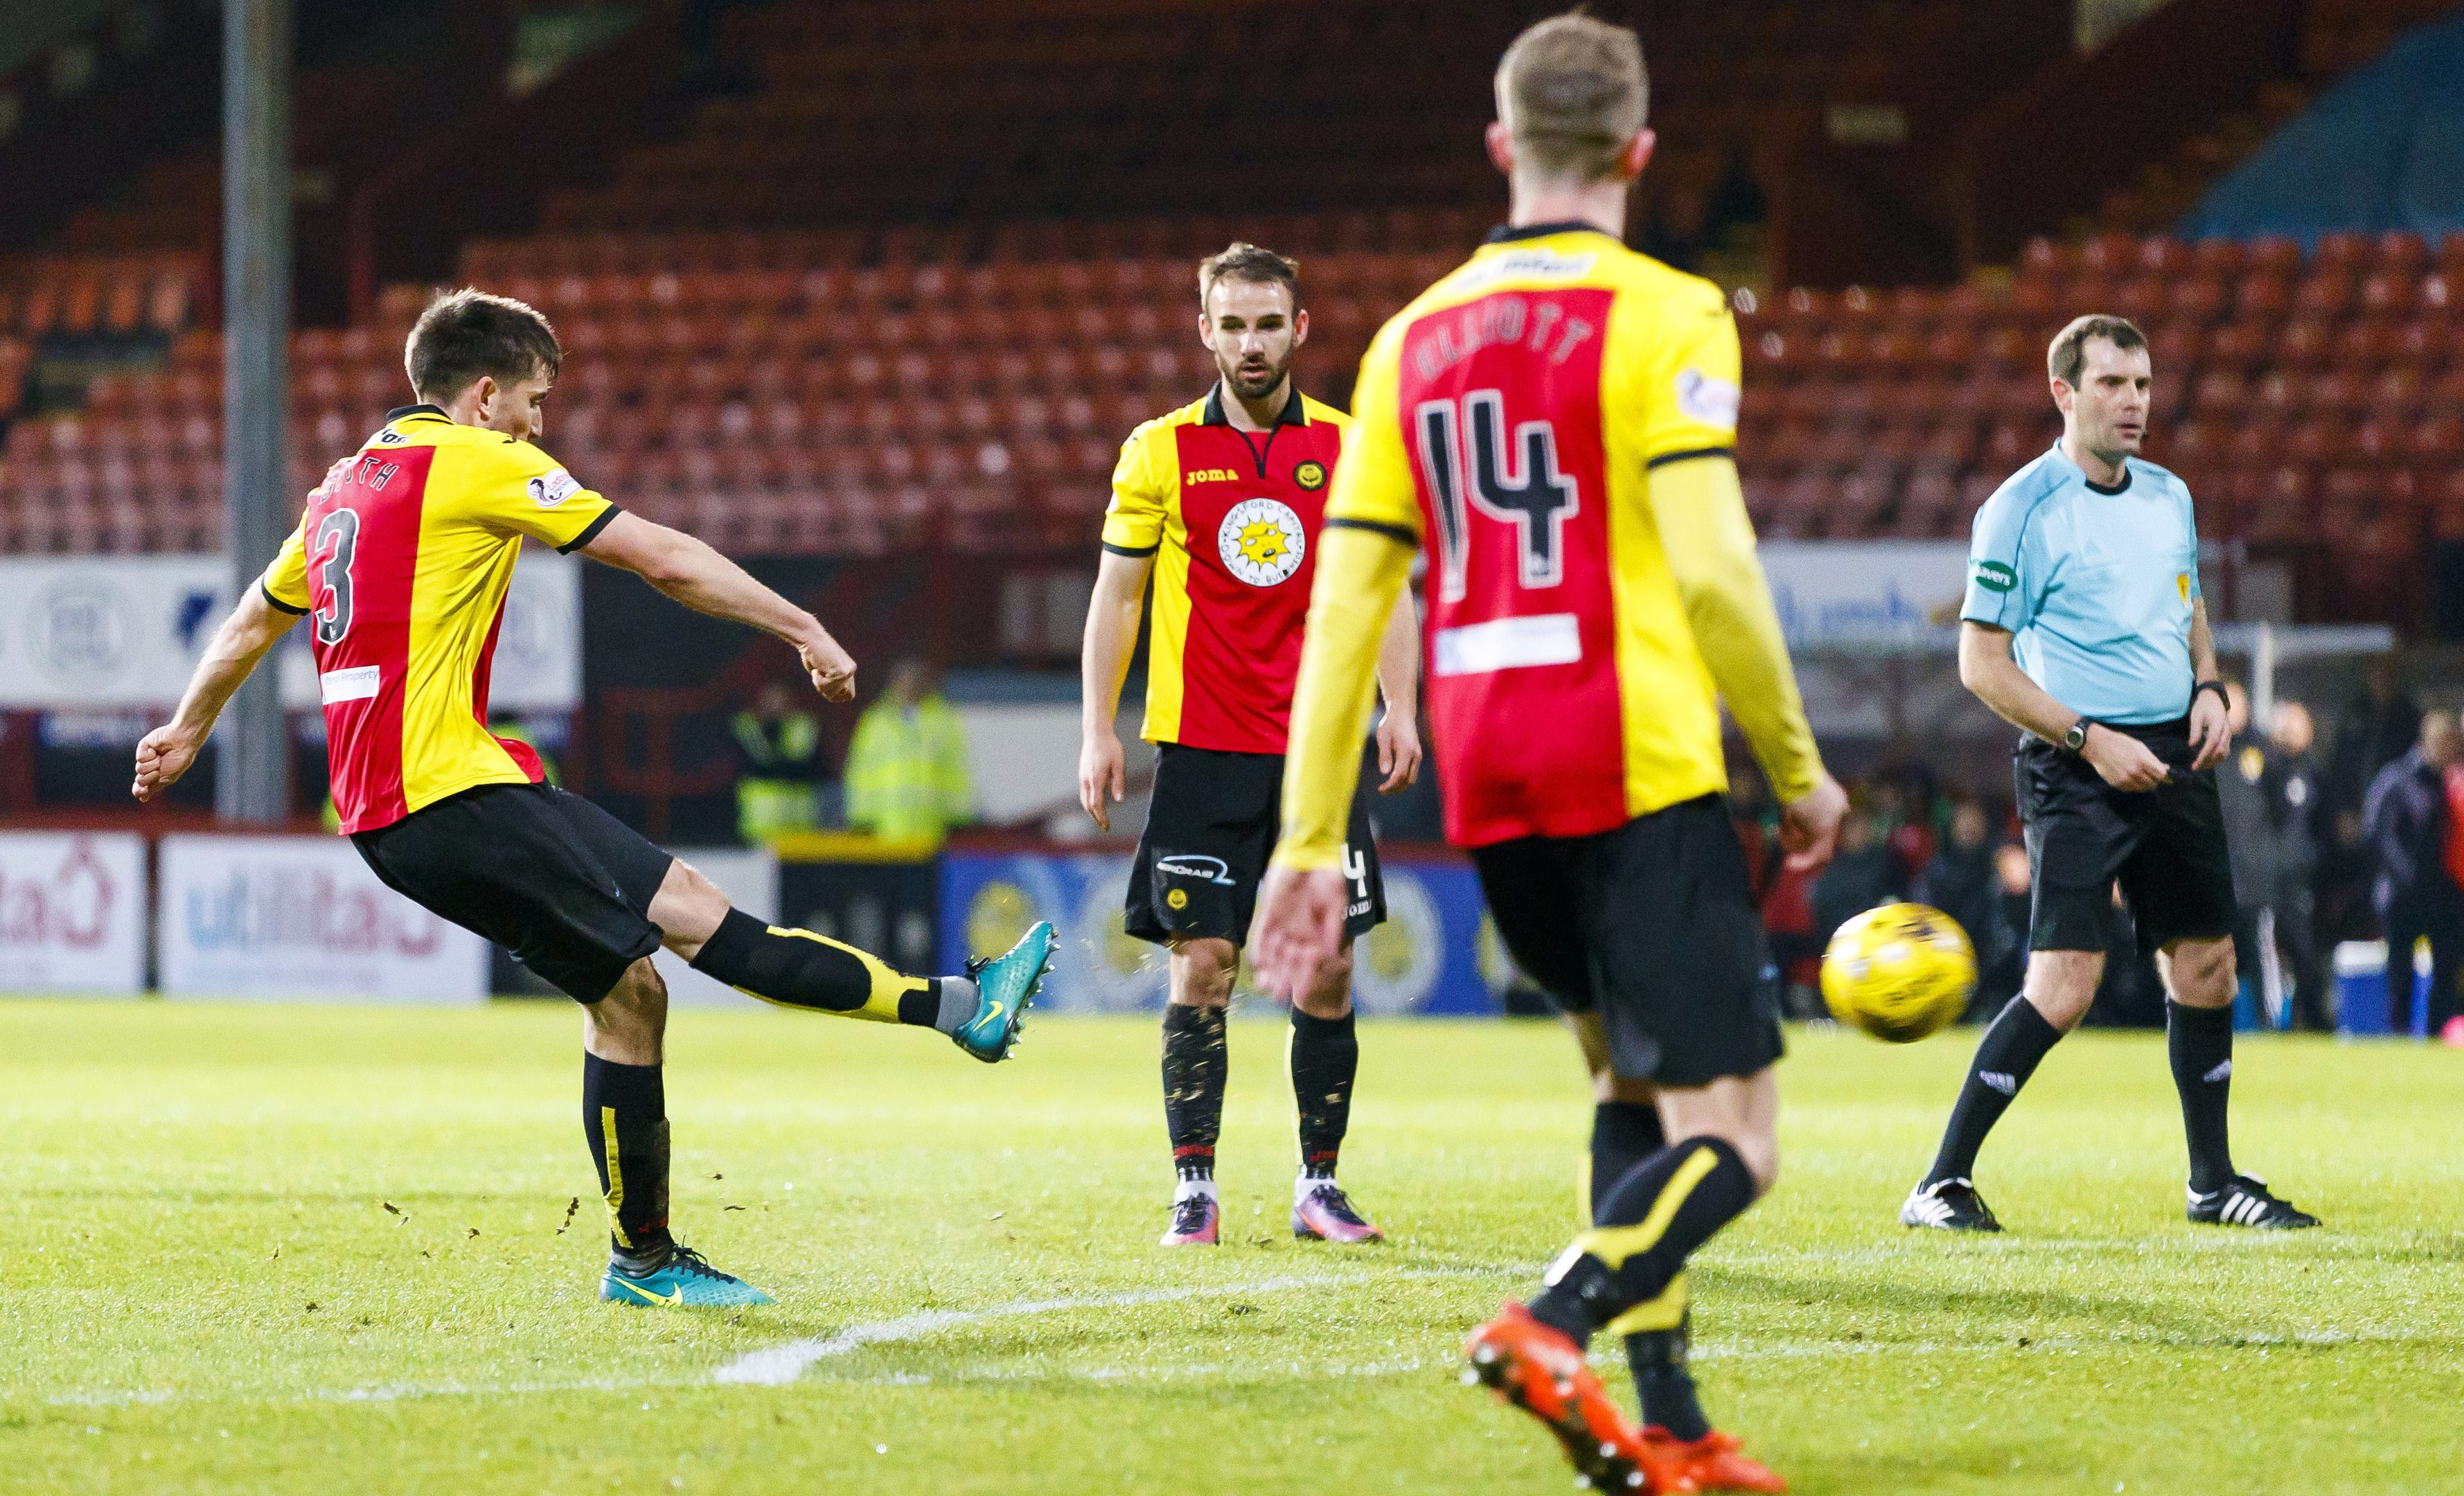 Partick's Callum Booth scores the opening goal.